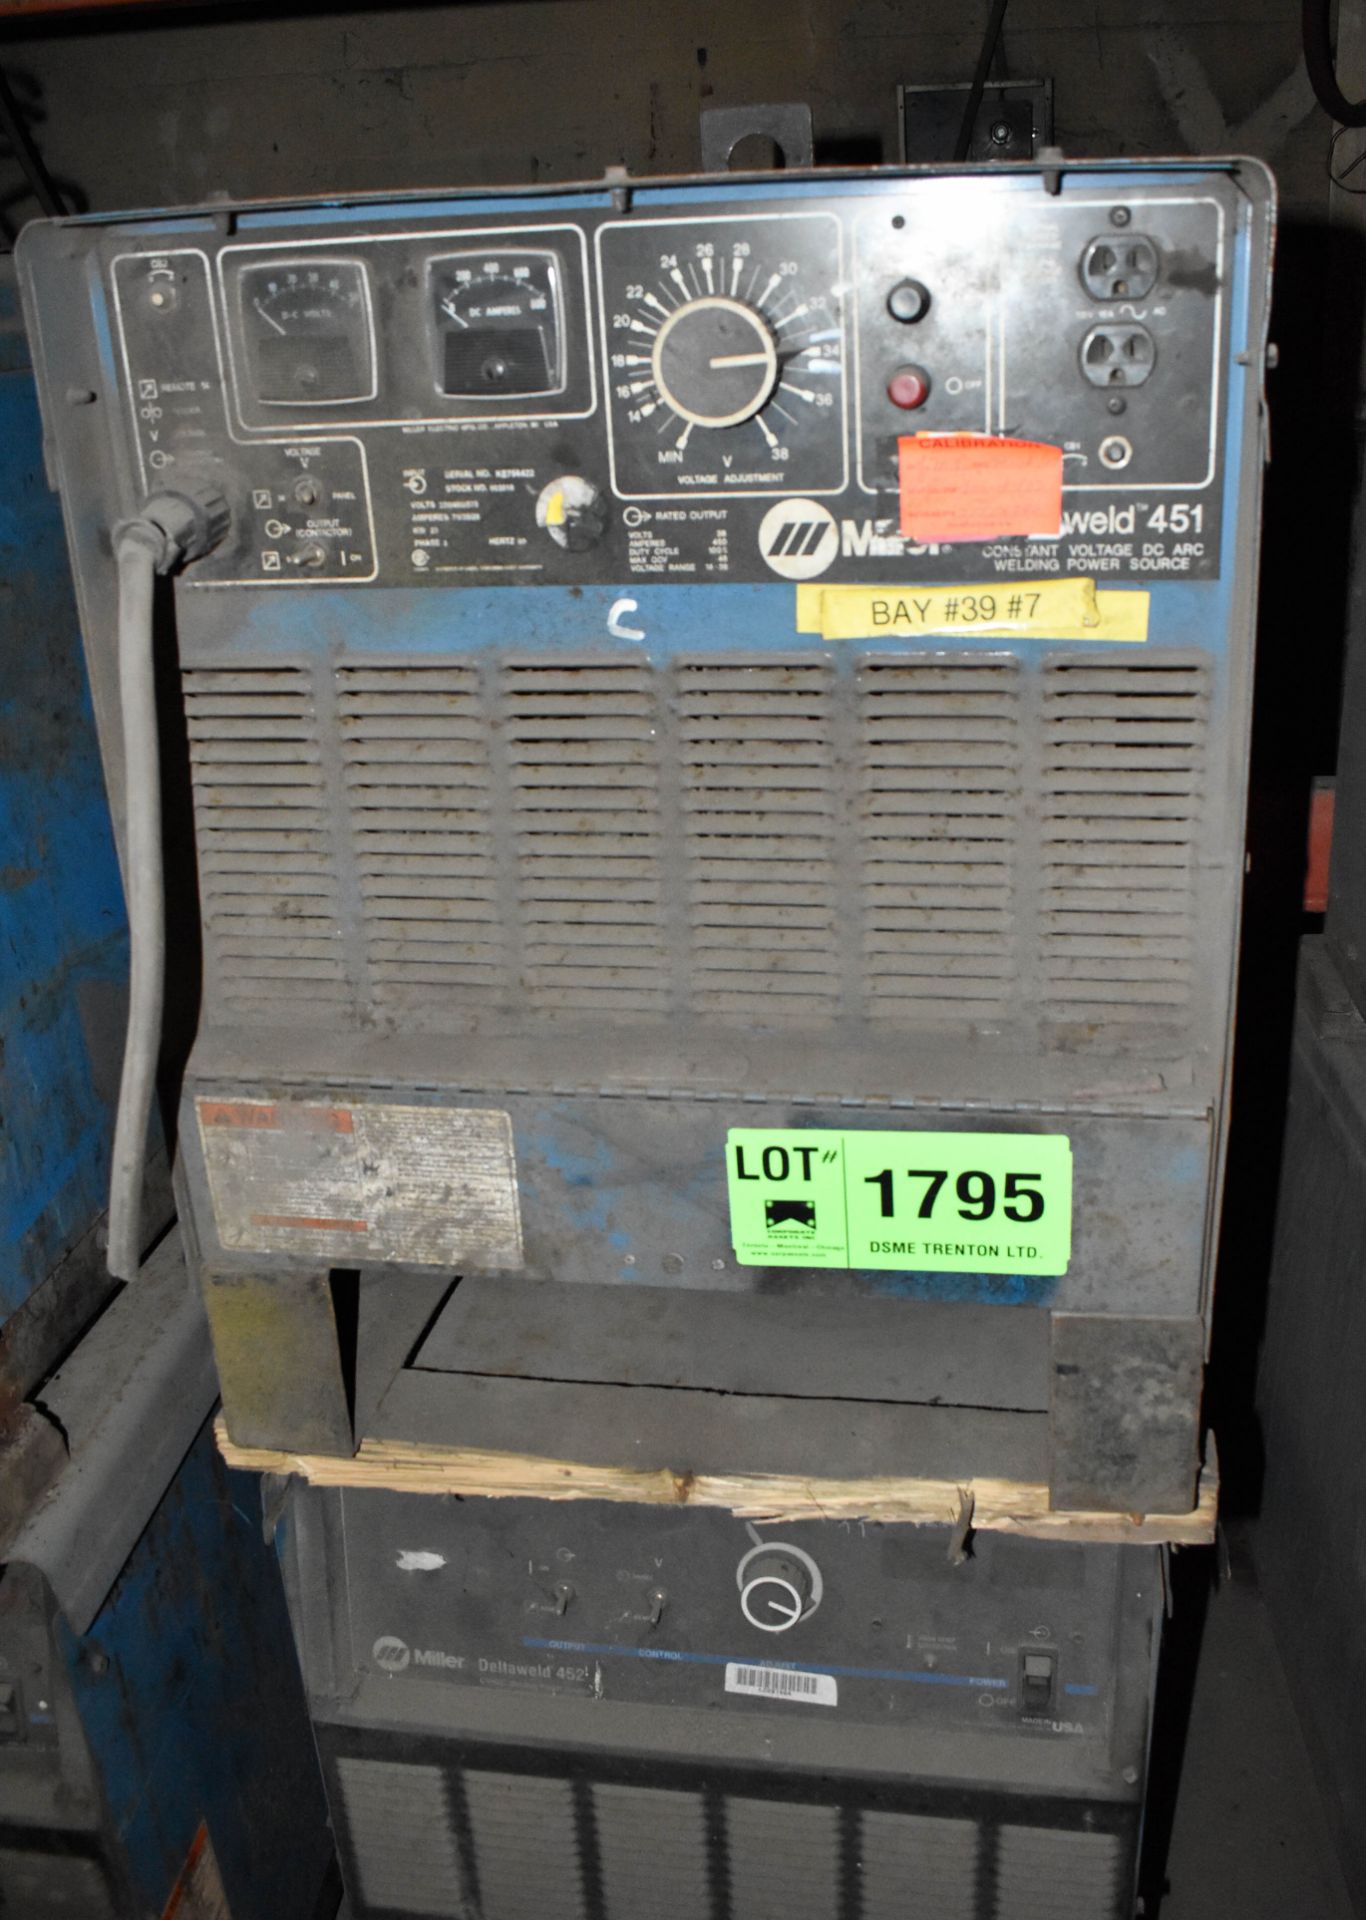 MILLER DELTAWELD 651 WELDING POWER SOURCE [RIGGING FEE FOR LOT# 1795 - $40 USD +PLUS TAXES]